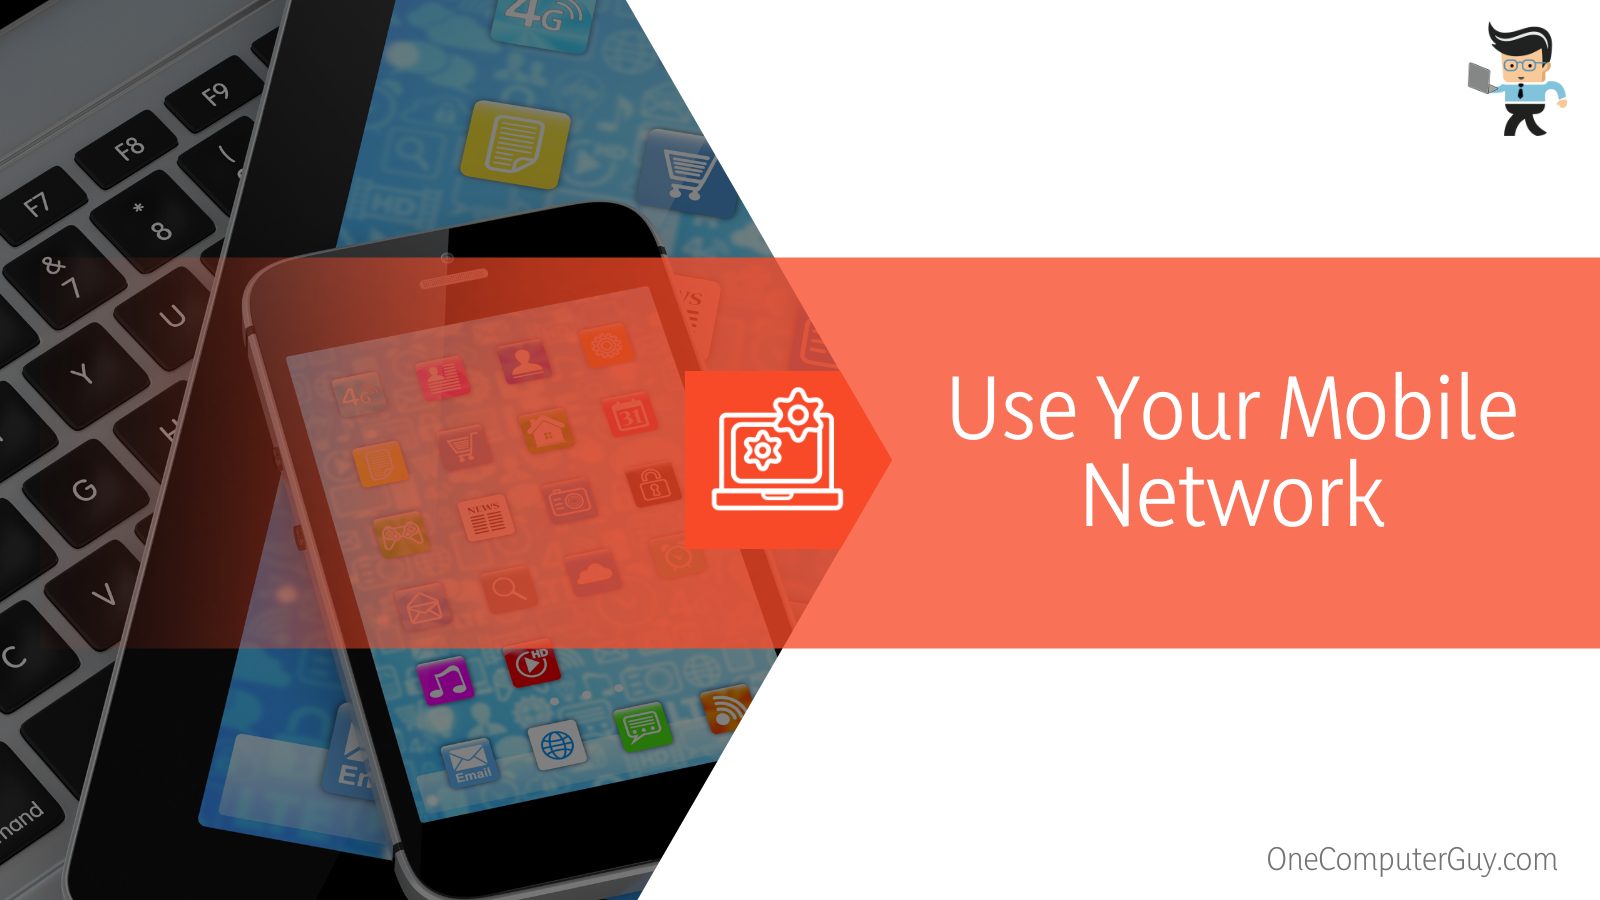 Use Your Mobile Network or Data Plan